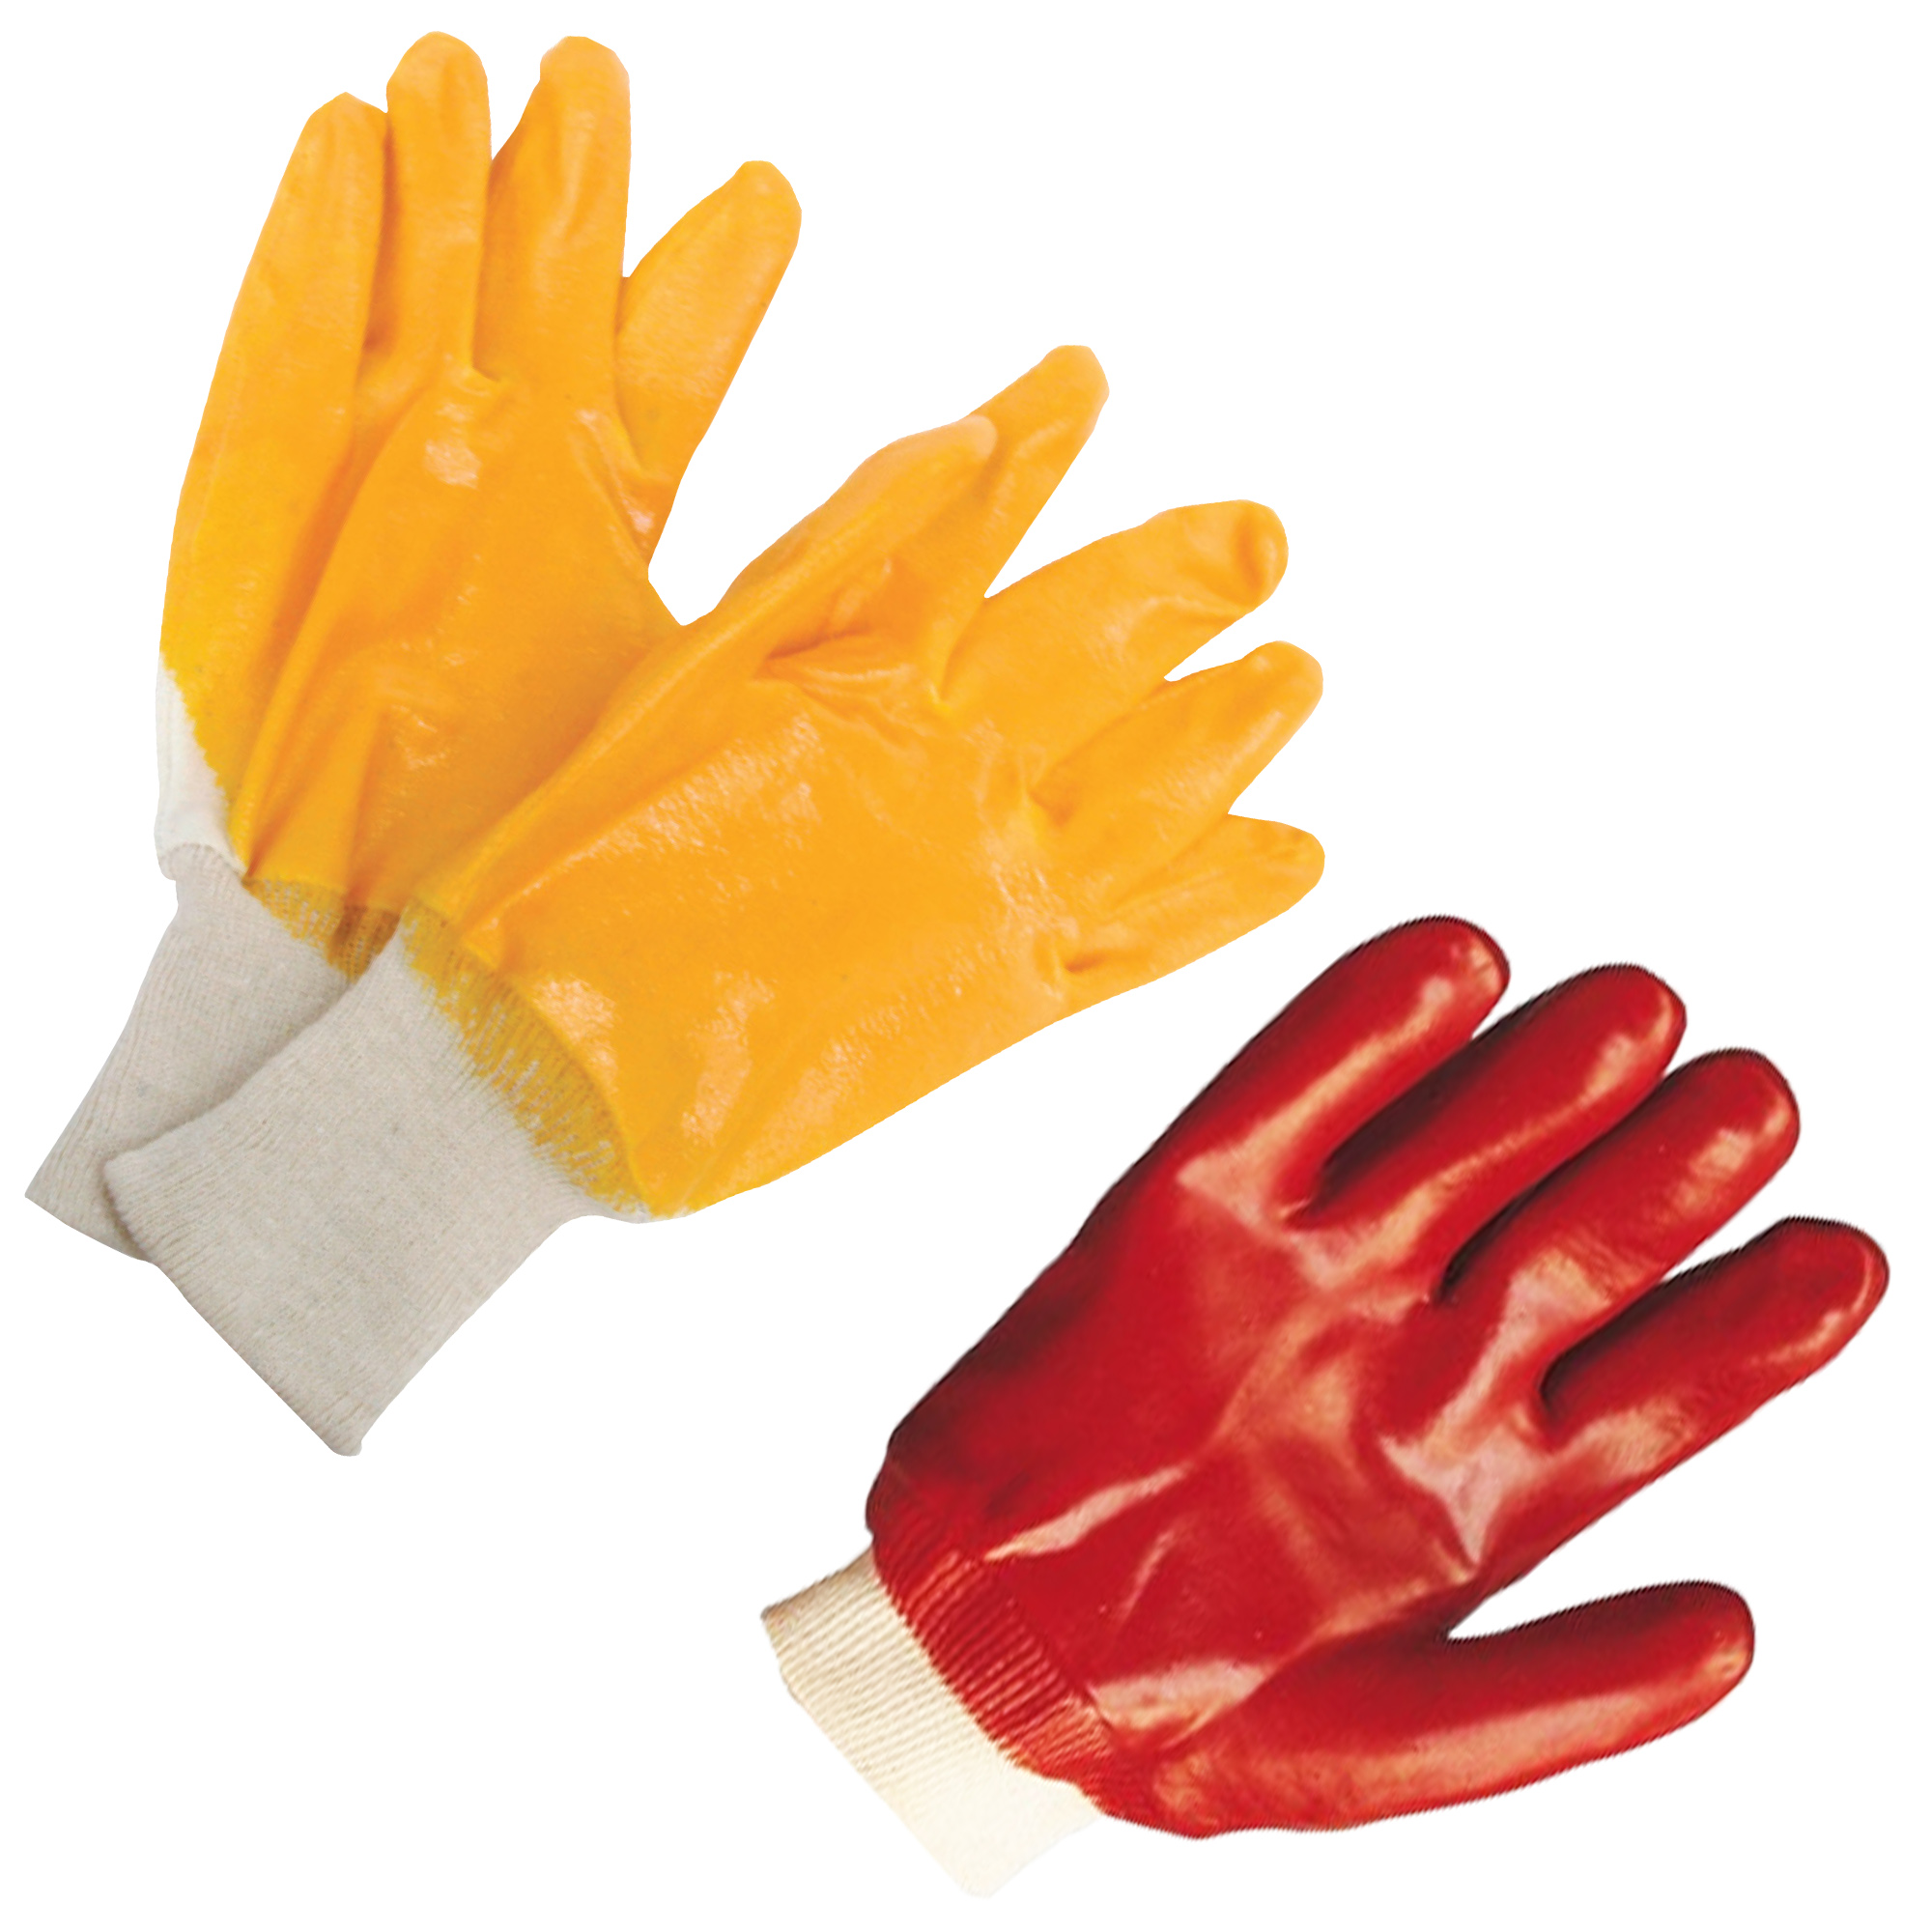 Hygiene and Safety/PROTECTIVE GLOVES/Chemical Resistant Gloves